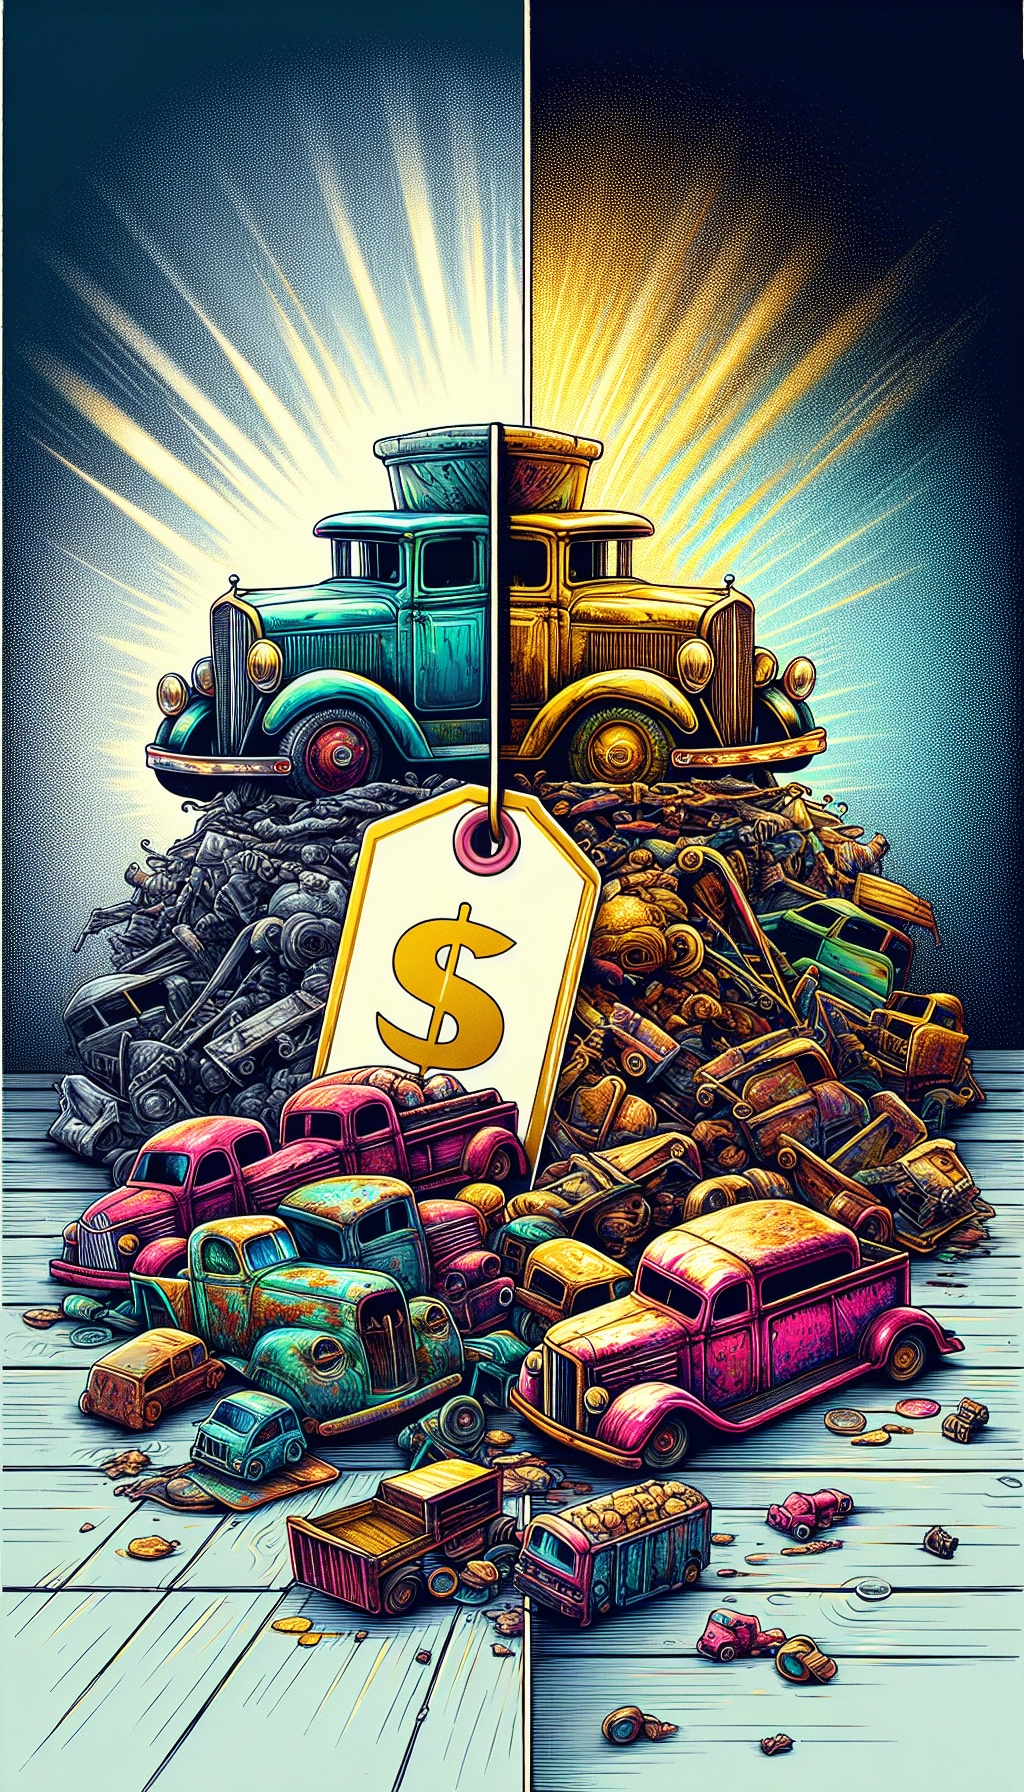 A vibrant, split-style illustration showcases on one side a rusty, forgotten pile of Tonka trucks and on the other, a gleaming auction room where those same toys, now restored, fetch a fortune. A shimmering price tag bridges both scenes, symbolizing the transformative journey from Rust to Riches.